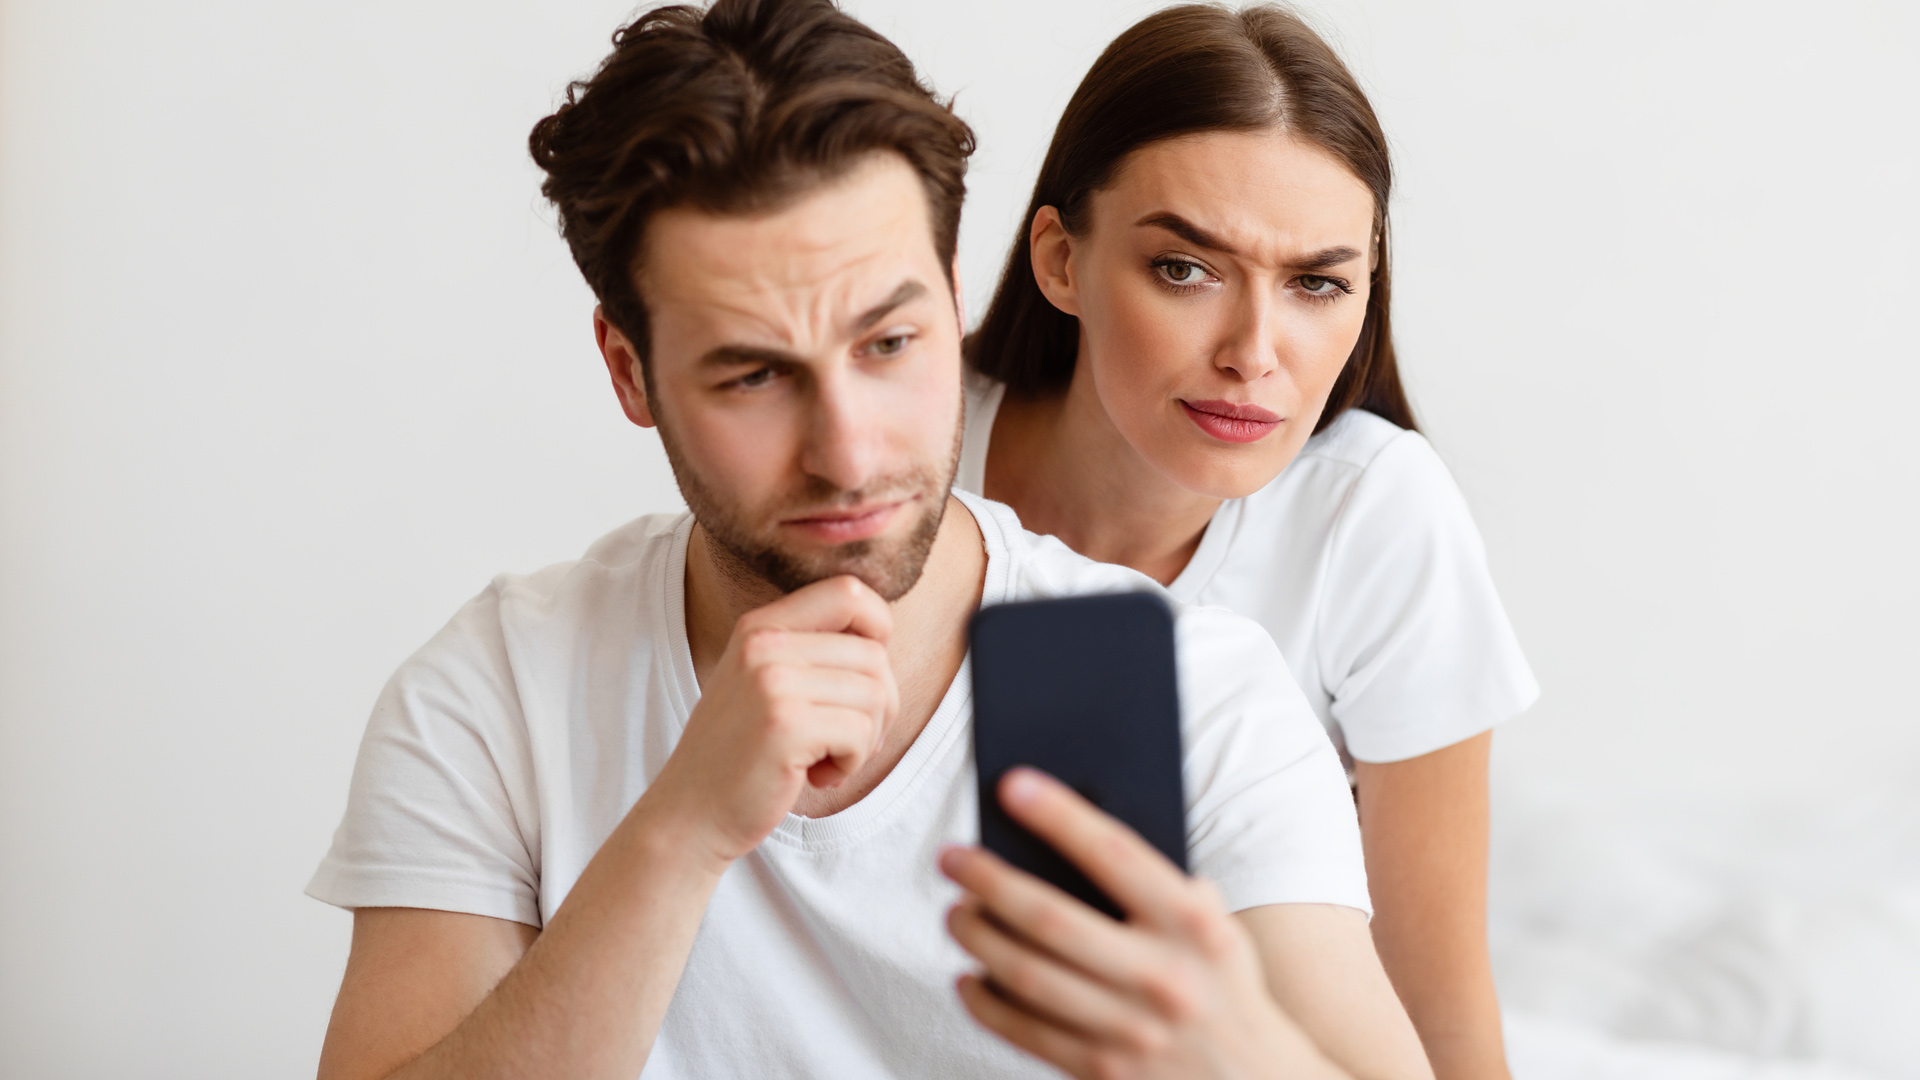 Brunette man and woman wearing white shirts. The man is looking at his phone screen while the woman is peaking behind him.